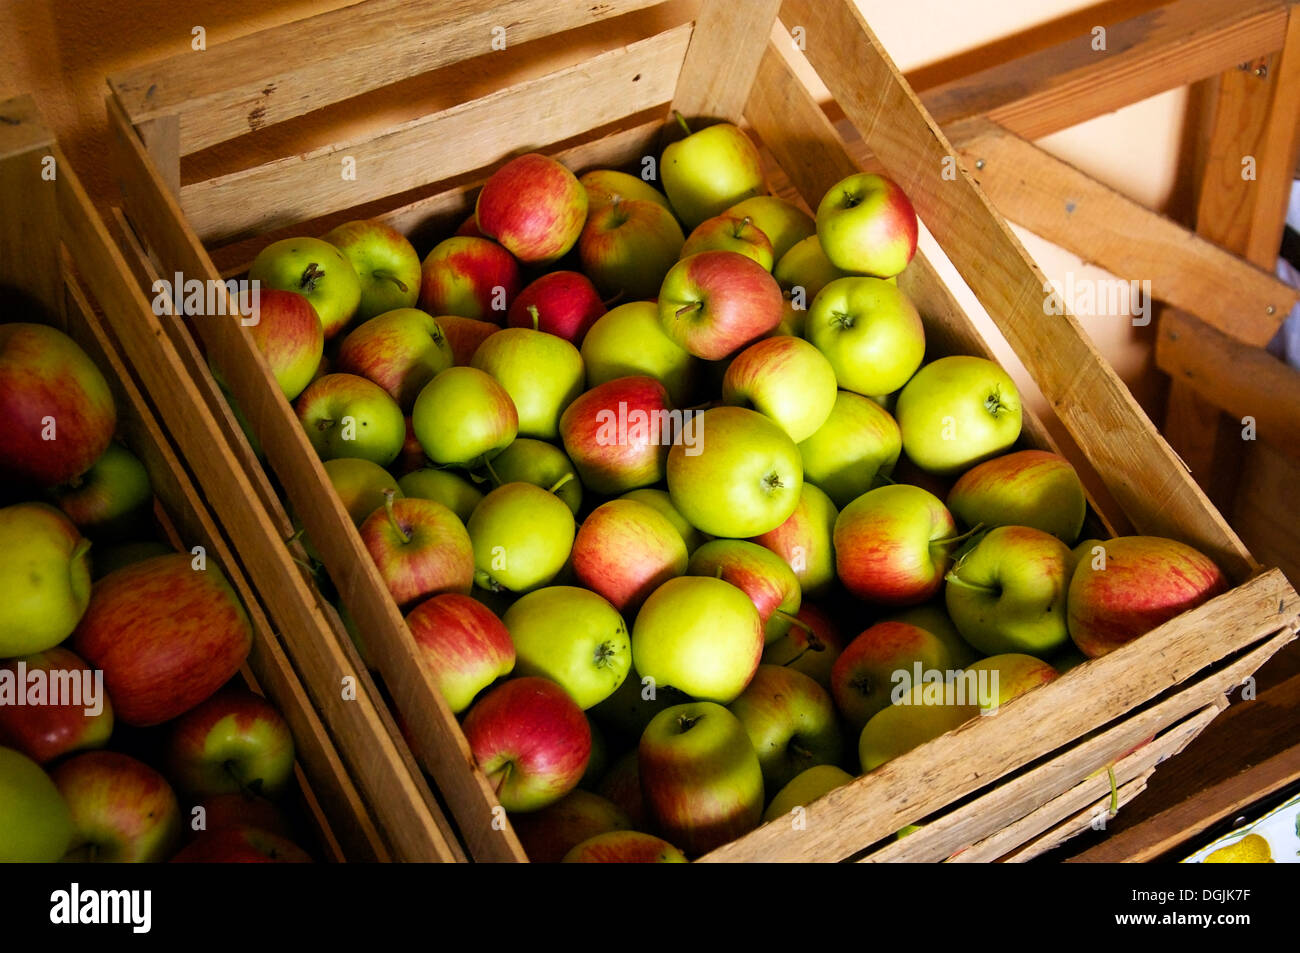 Box of just harvested, organic apples. Stock Photo